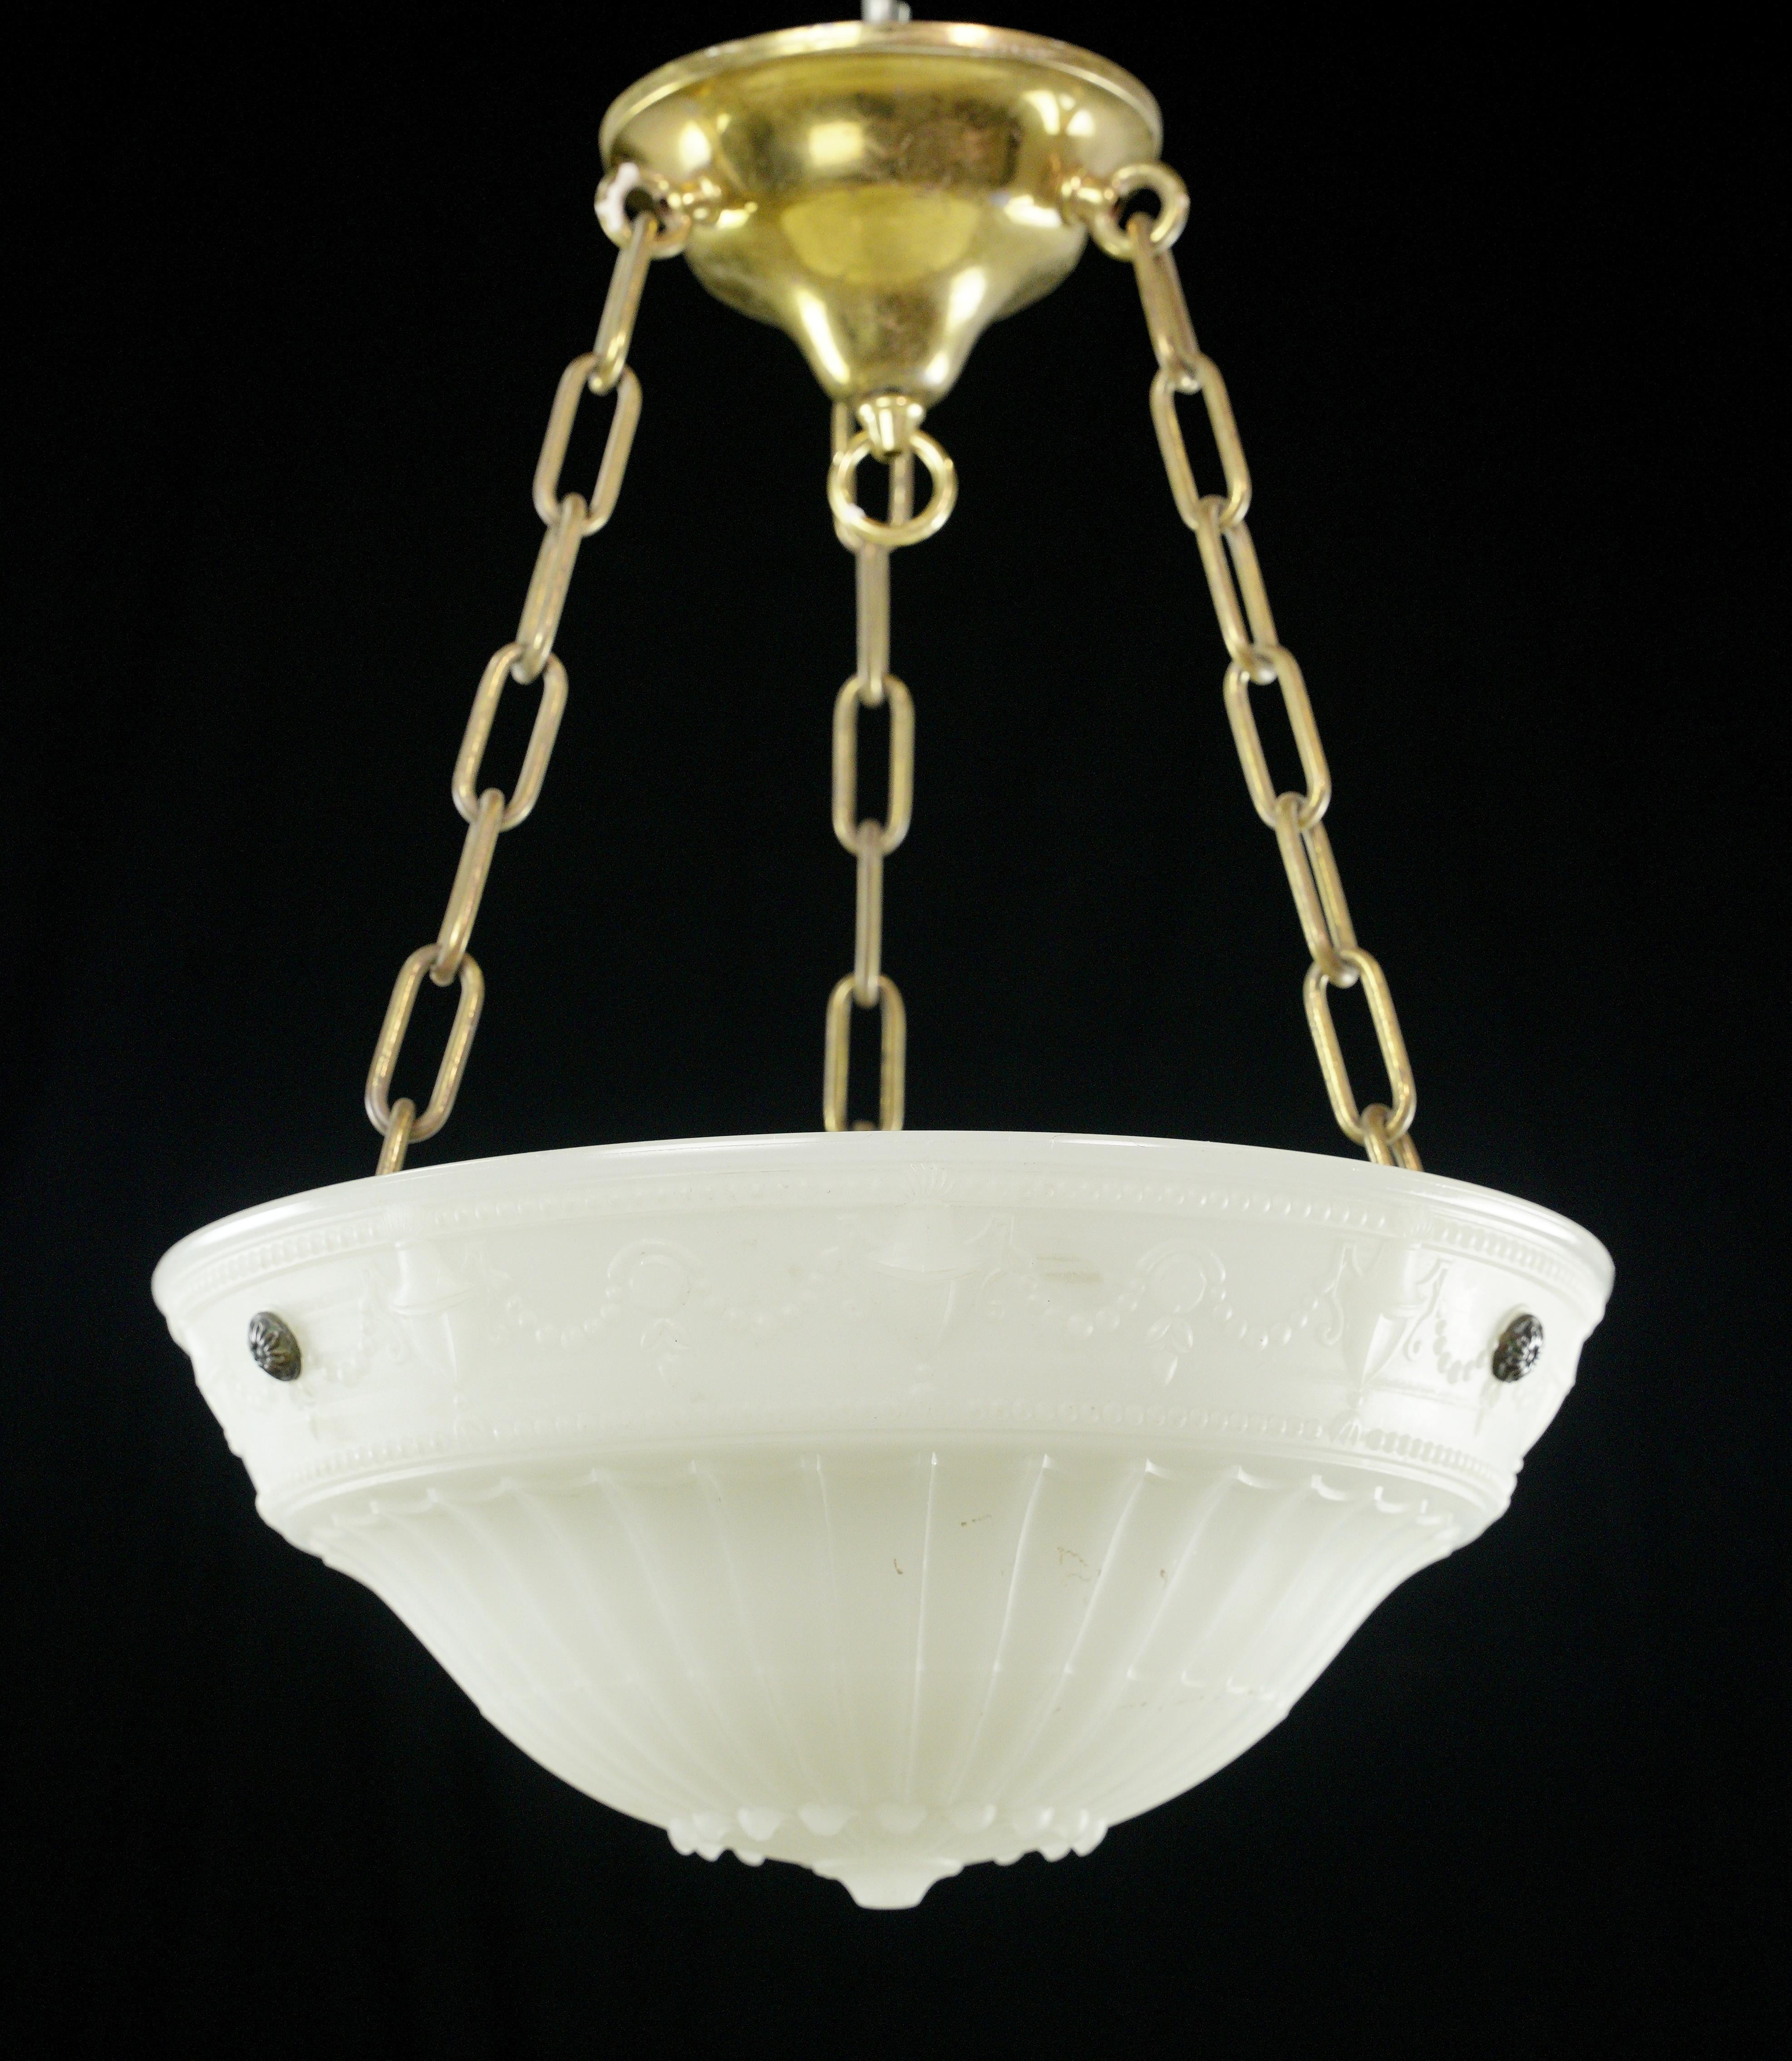 Victorian Ornate Milk Glass Dish Polished Brass Chain Pendant Light For Sale